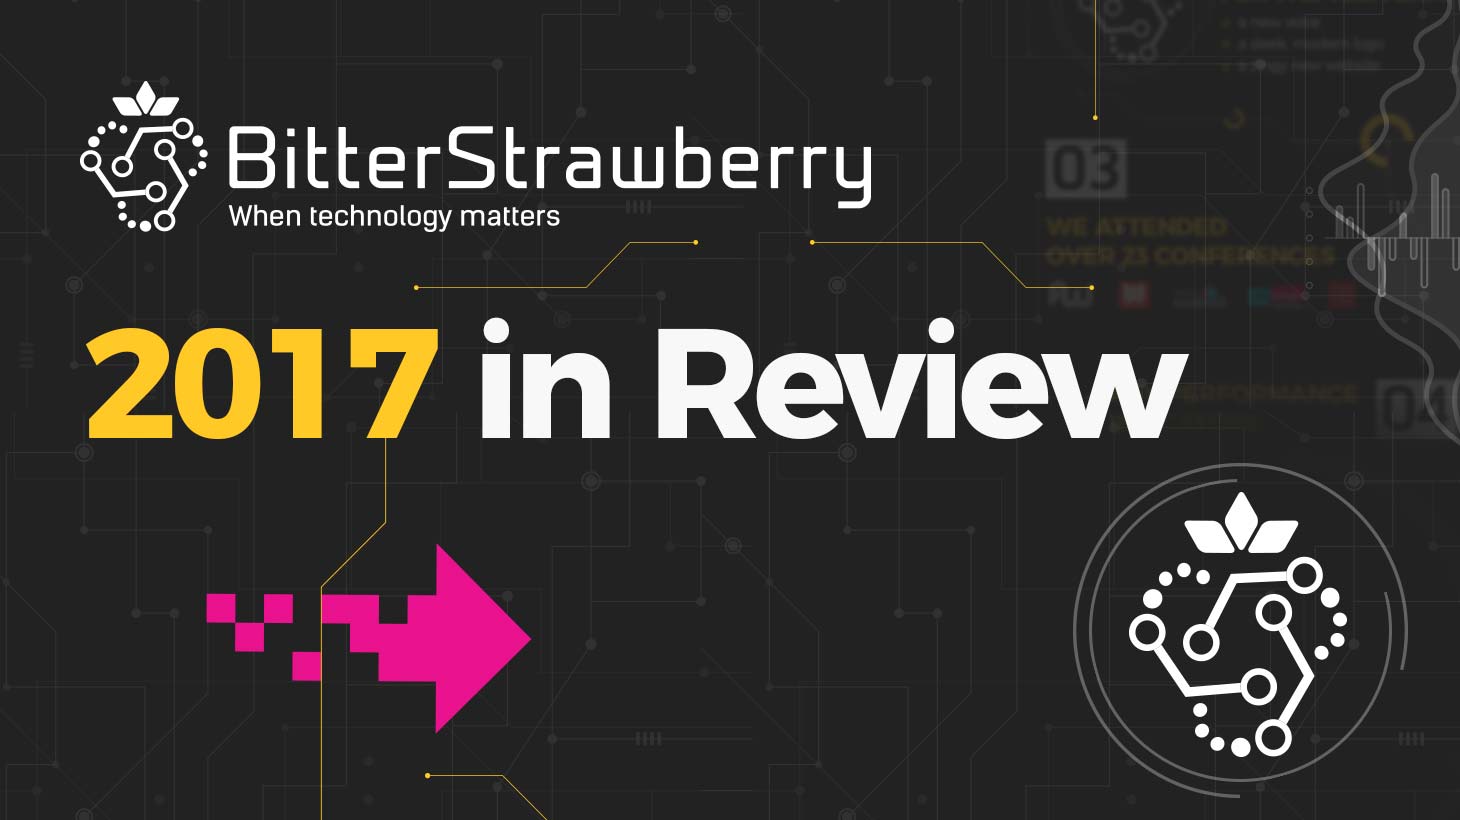 BitterStrawberry - 2017 in Review